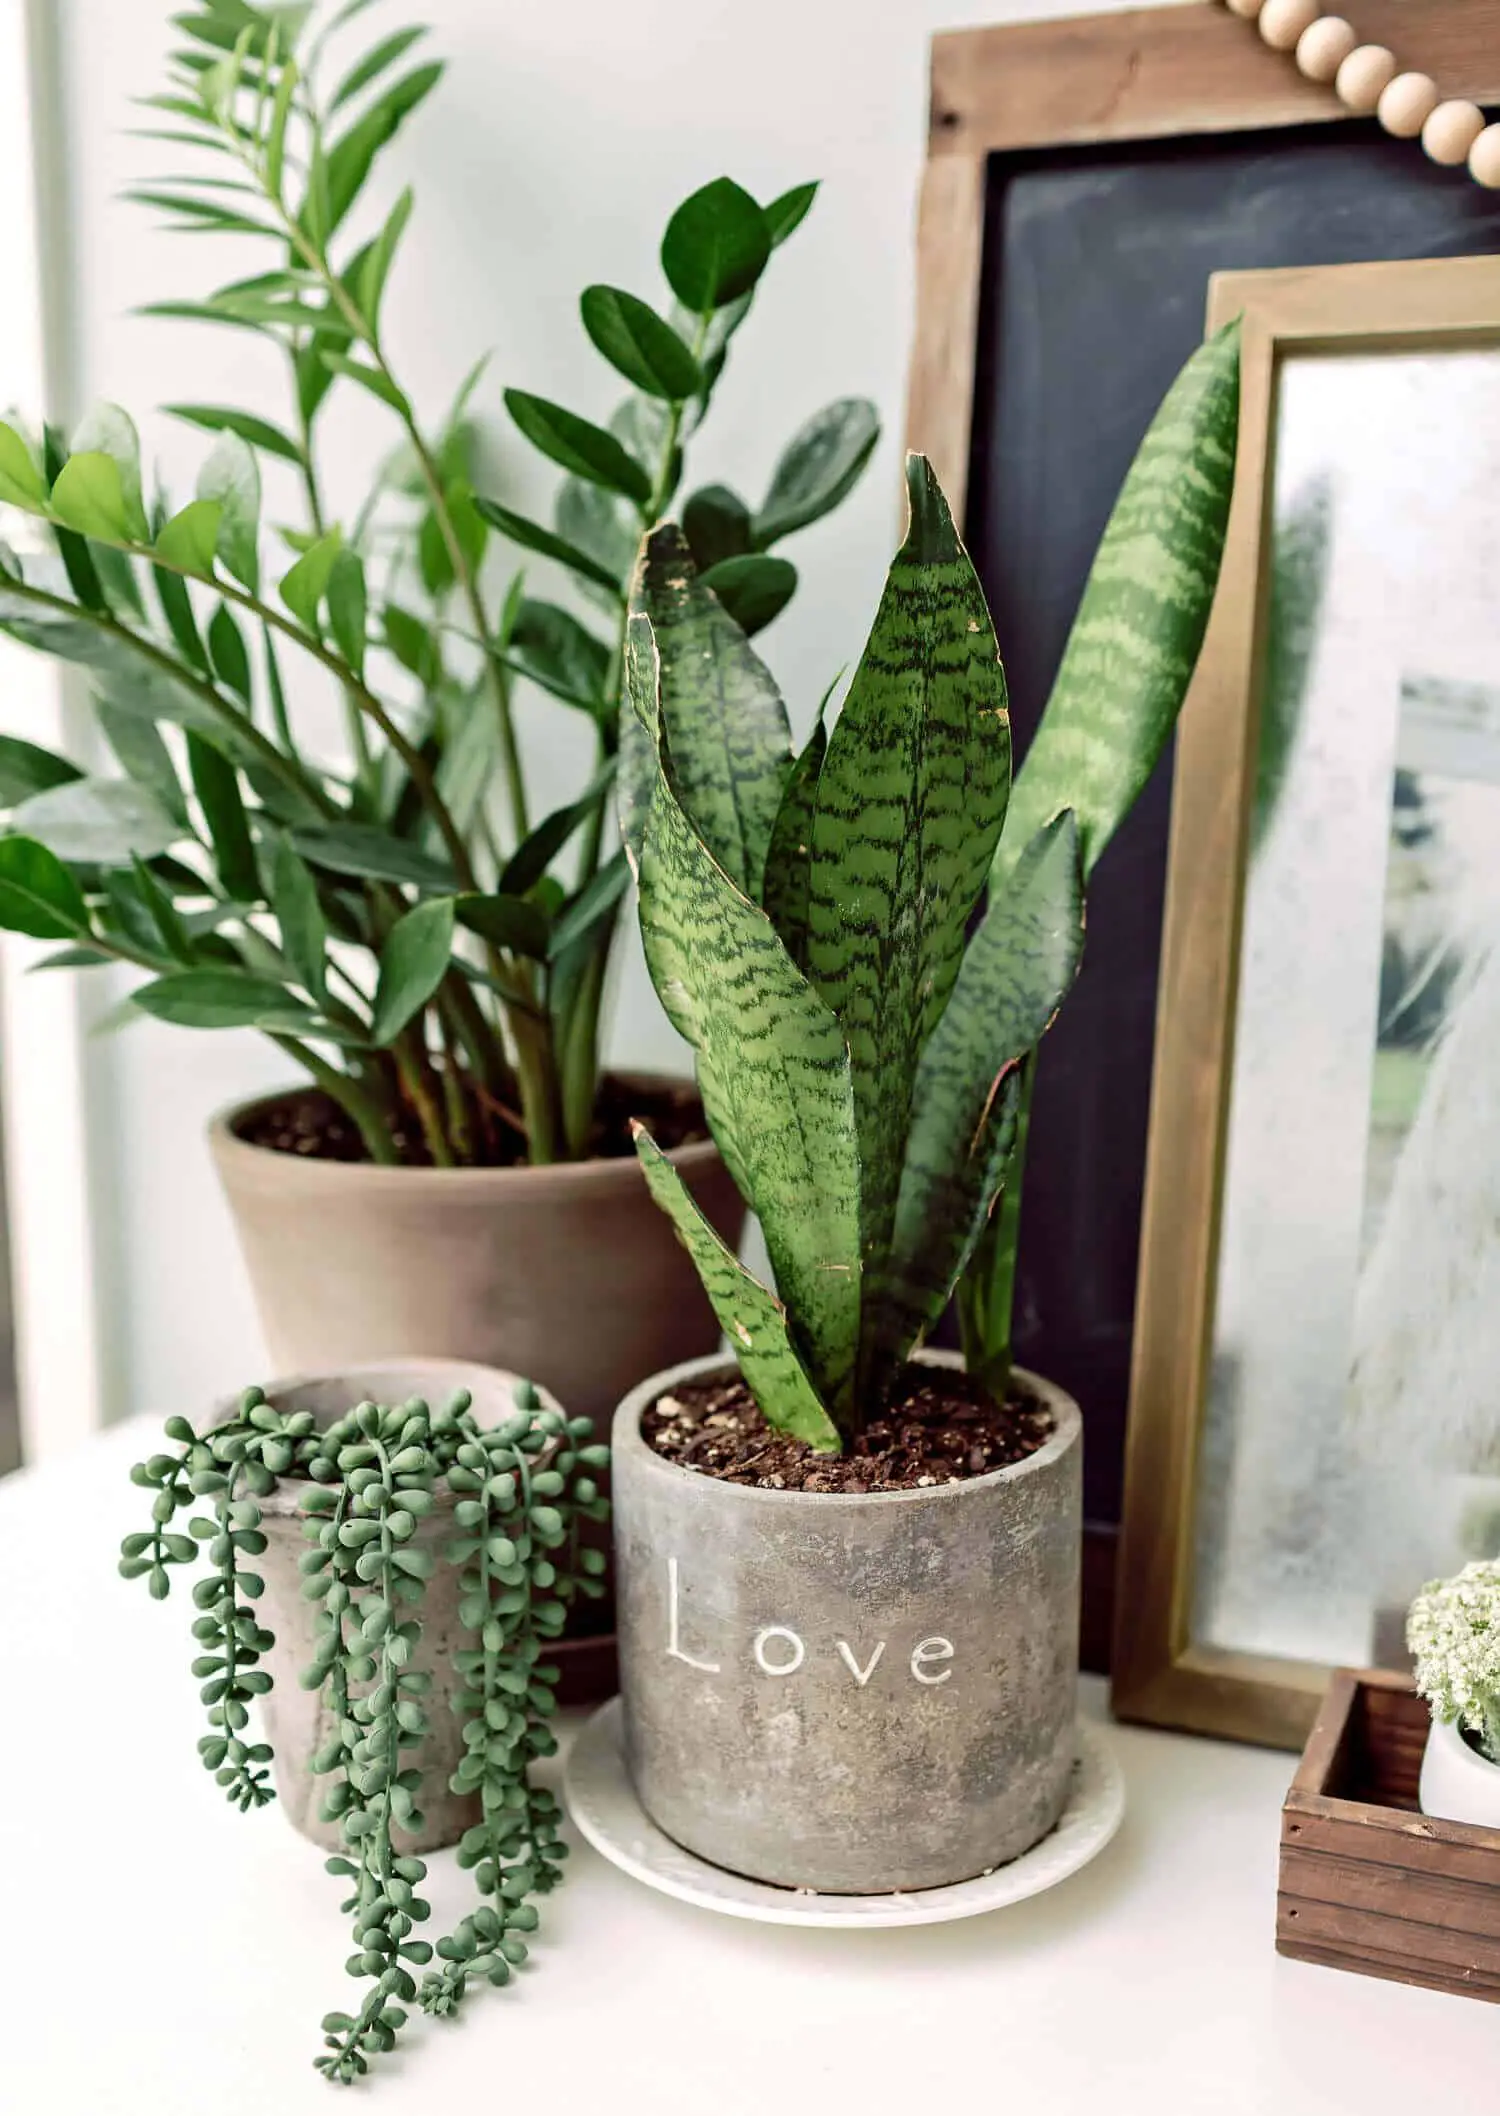 Cacti and succulents are low maintenance, for instance, whereas there are indoor plants that require much more attention and care, so do pay attention to those details when planning and buying your interior design plants inside house ideas.